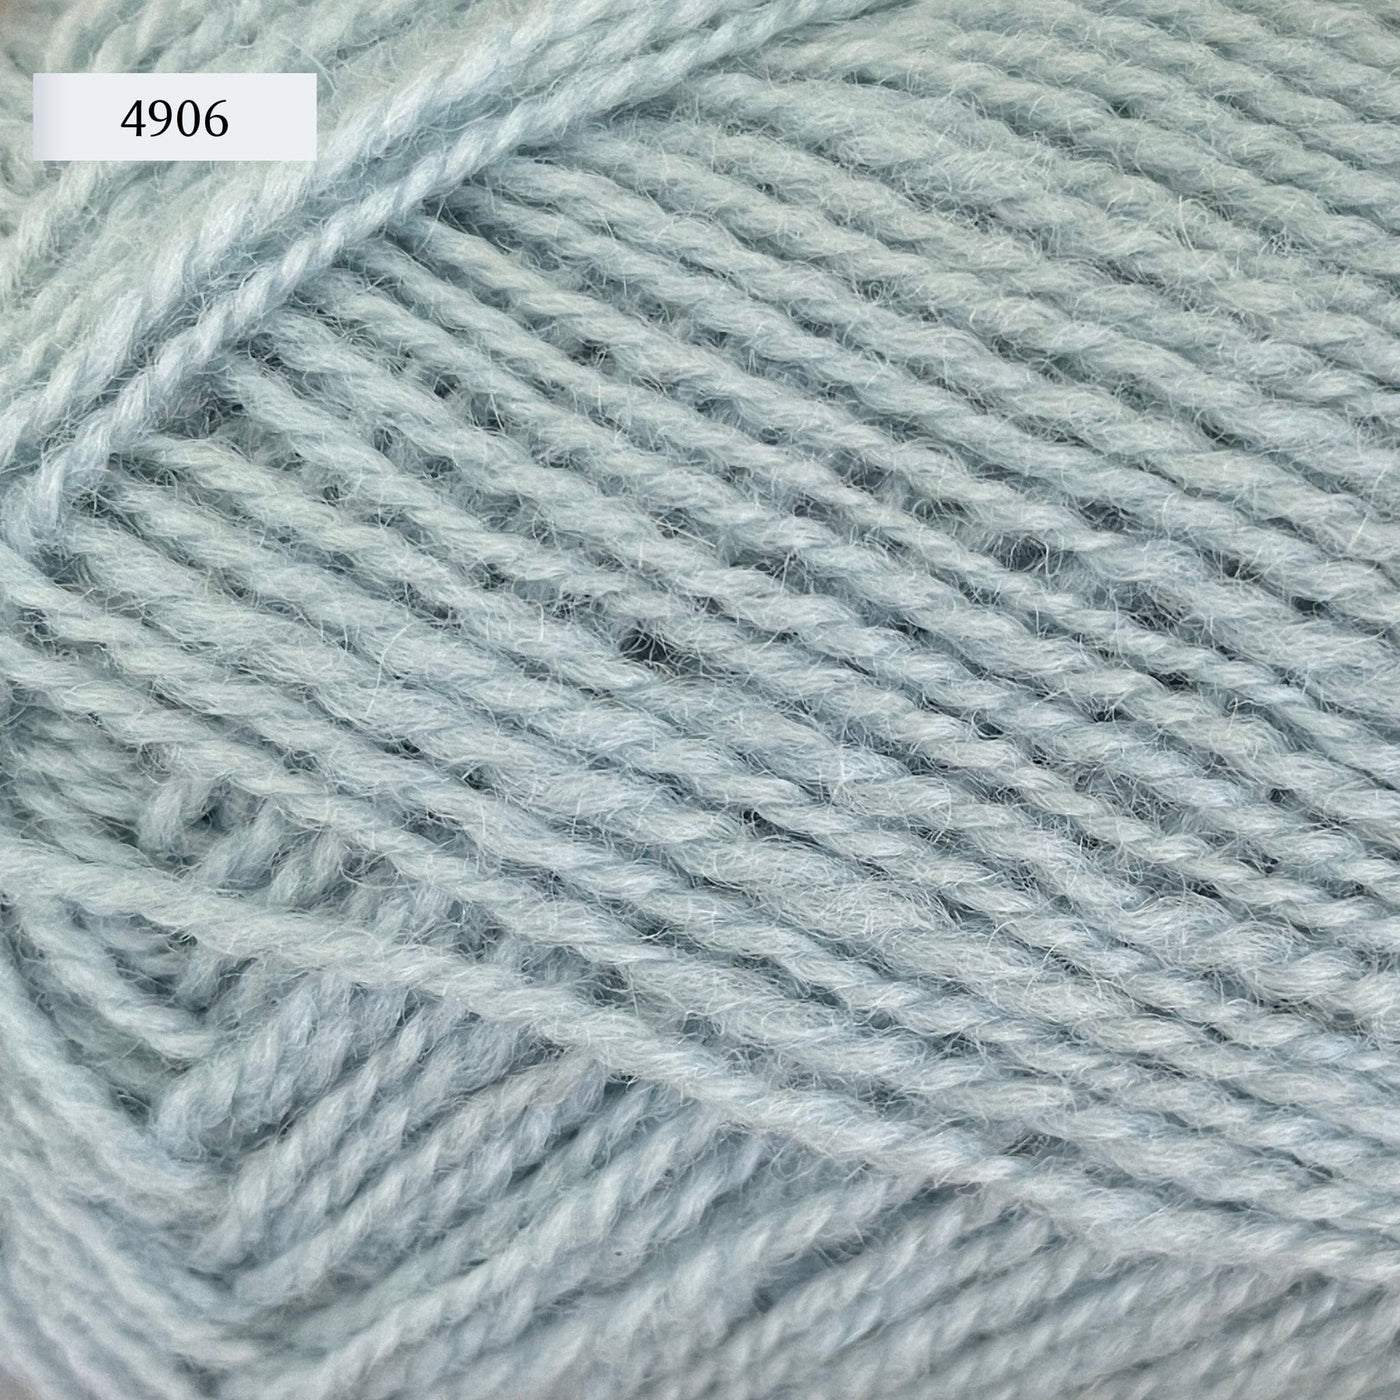 Rauma Gammelserie 2ply wool yarn, fingering weight, in color 4906, light ice blue